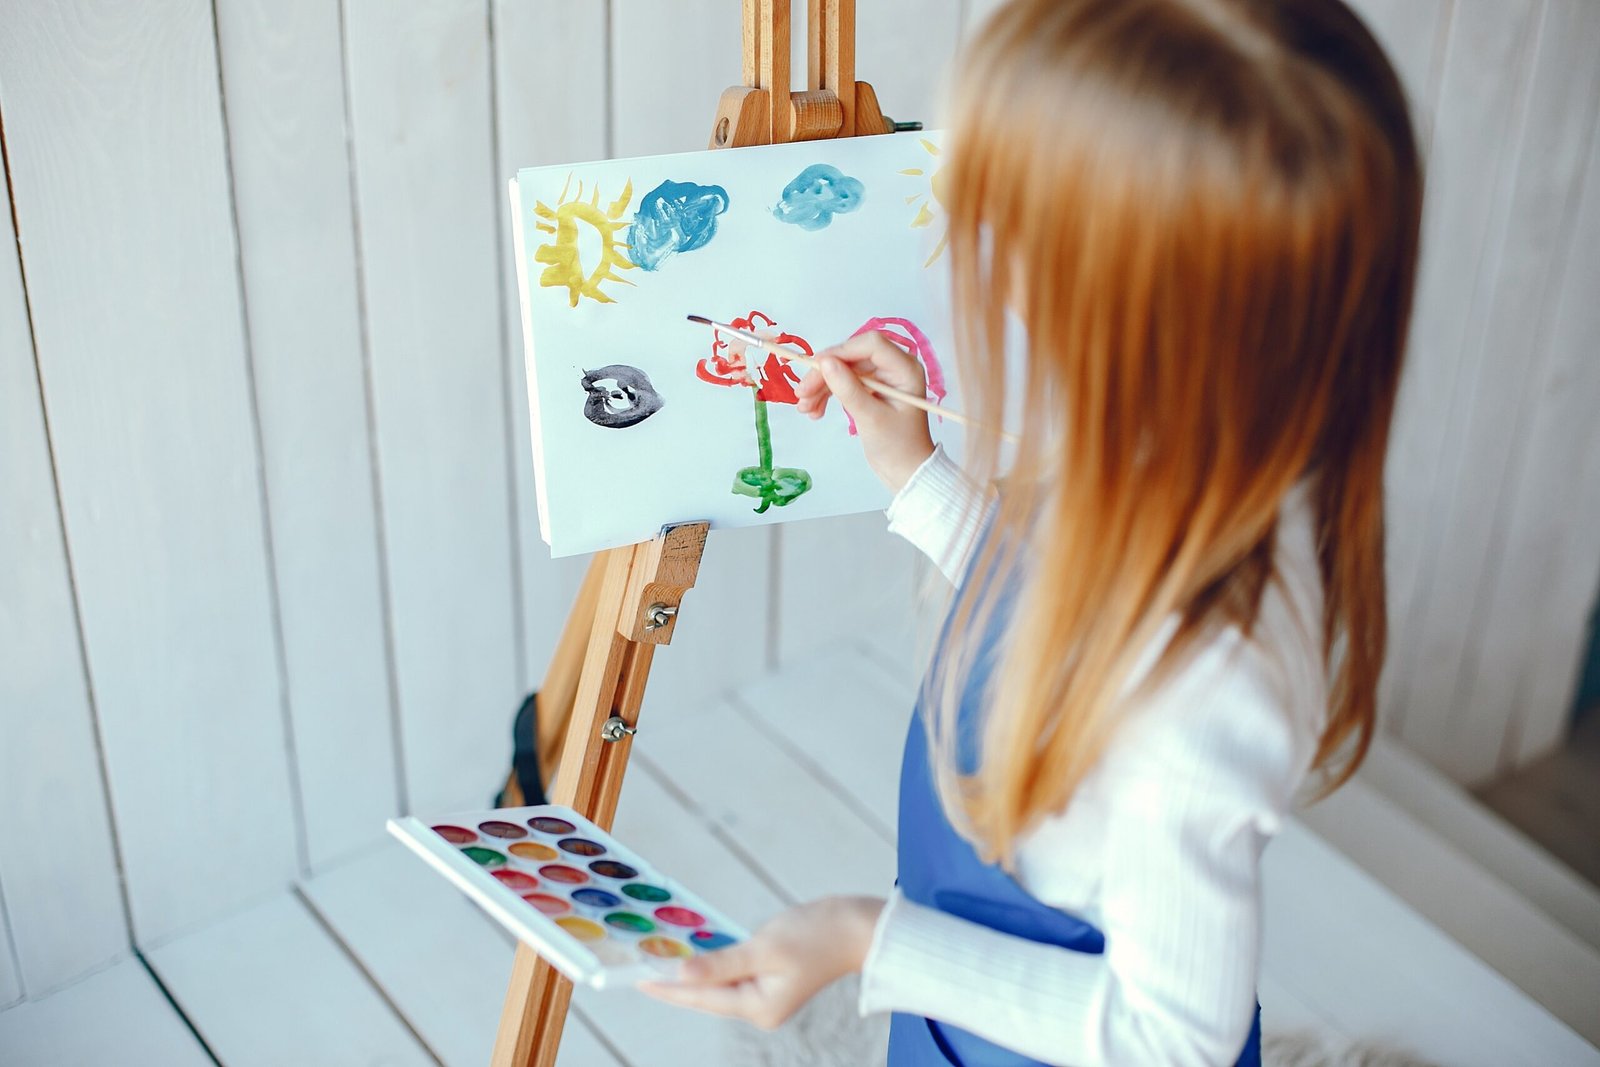 Easel Activities for Preschoolers A Fun and Engaging Way to Learn